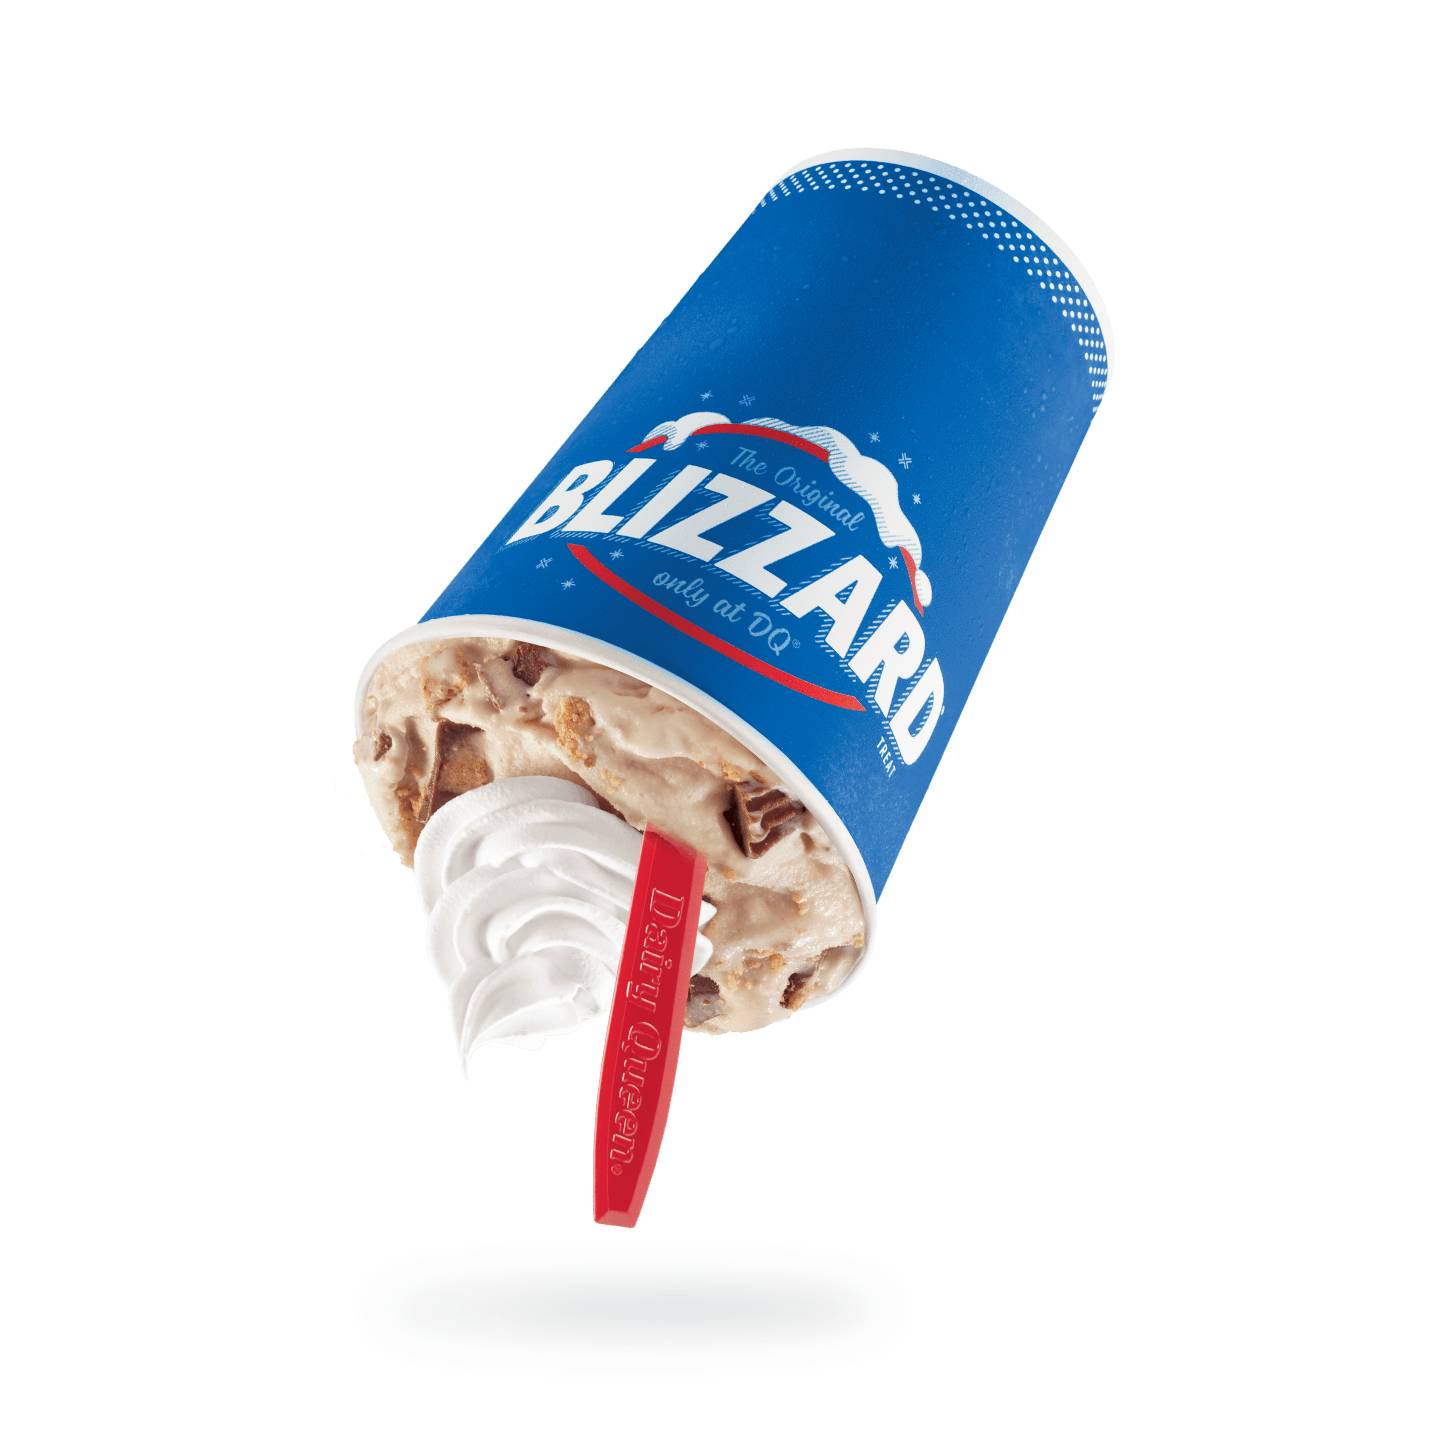 REESE'S® Peanut Butter Cup Pie Blizzard® Treat (Blizzard of the Month)